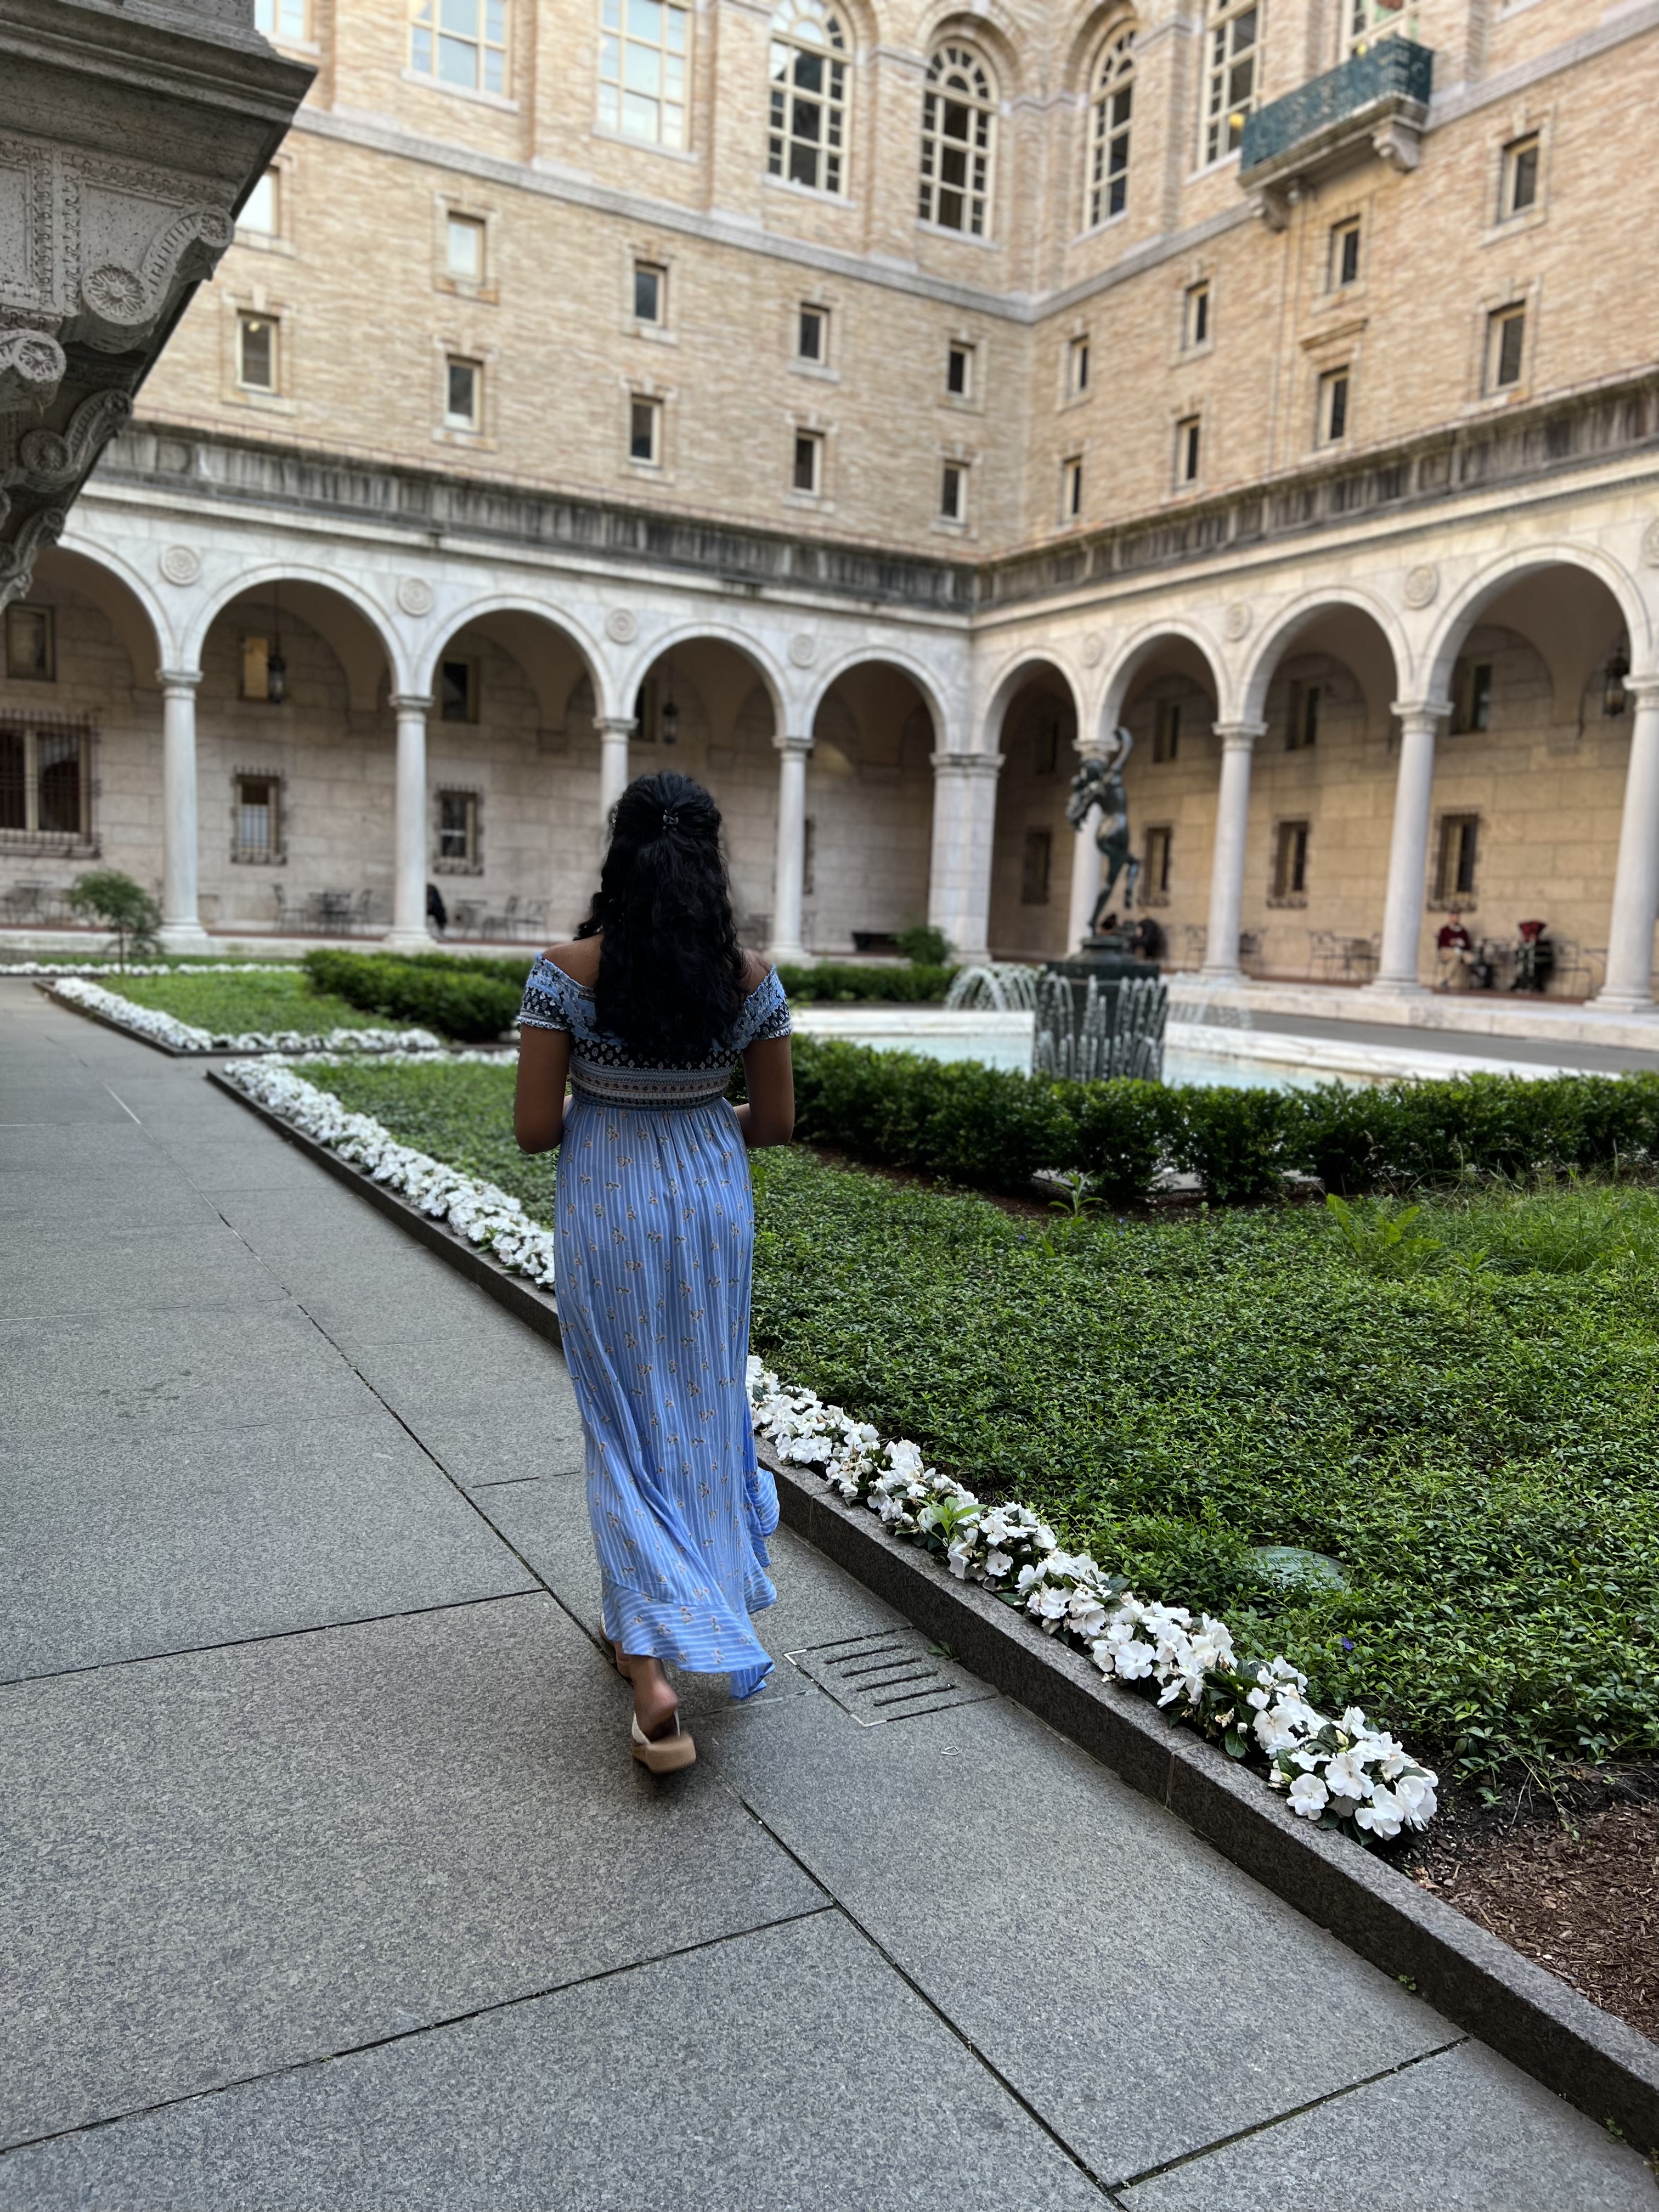 The Courtyard at Boston Public Library